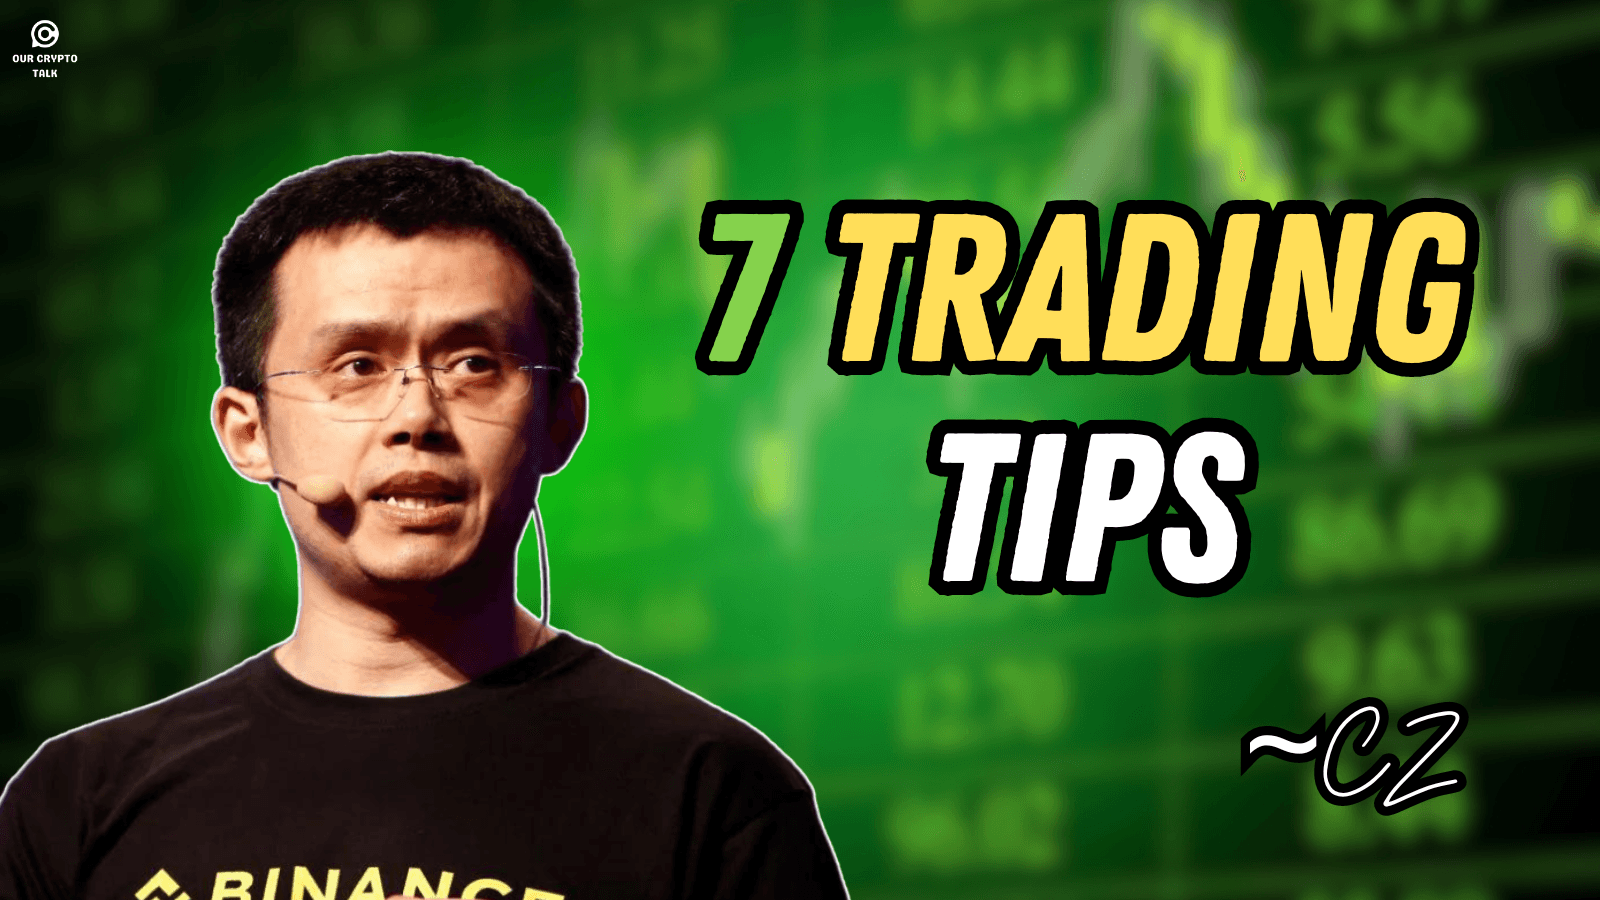 7 trading tips by CZ from Binance